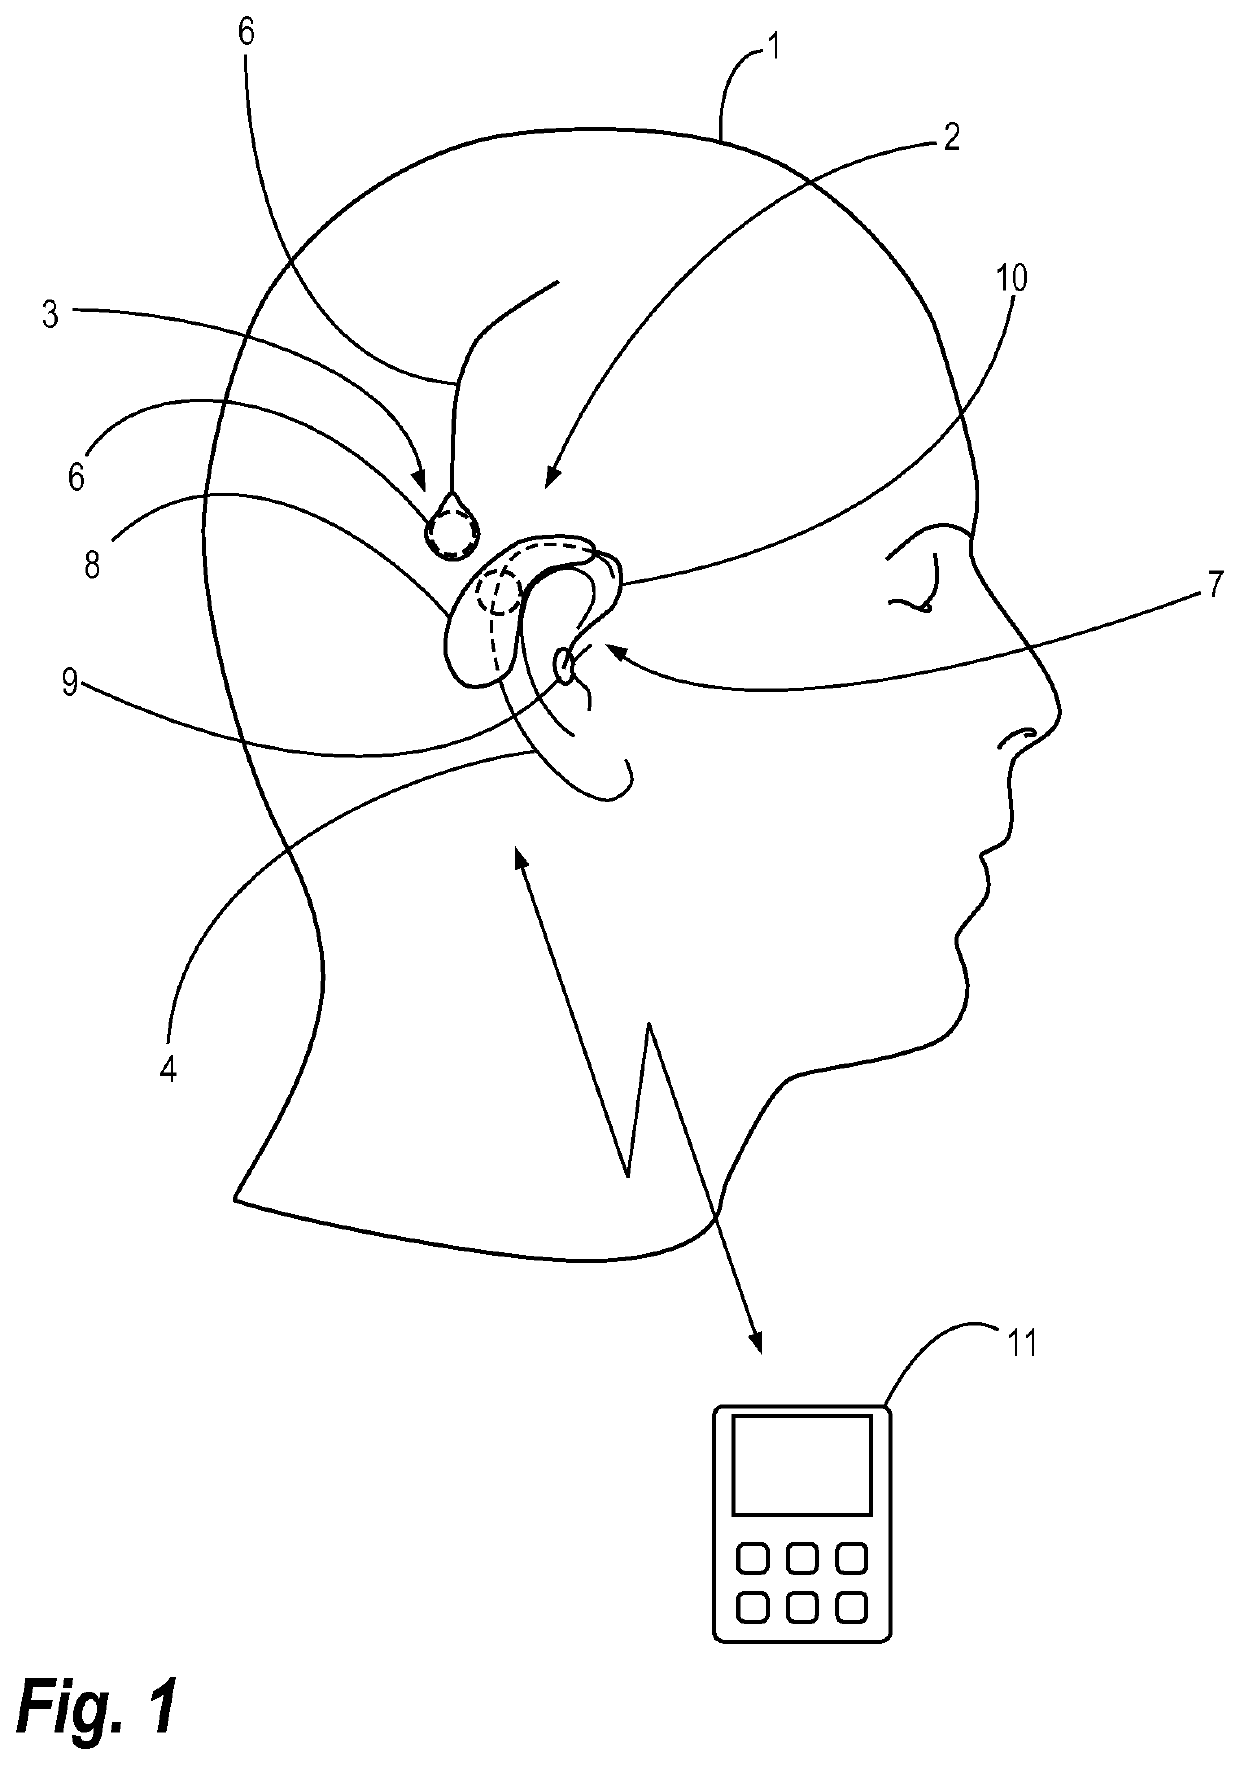 EEG monitoring apparatus and method for presenting messages therein